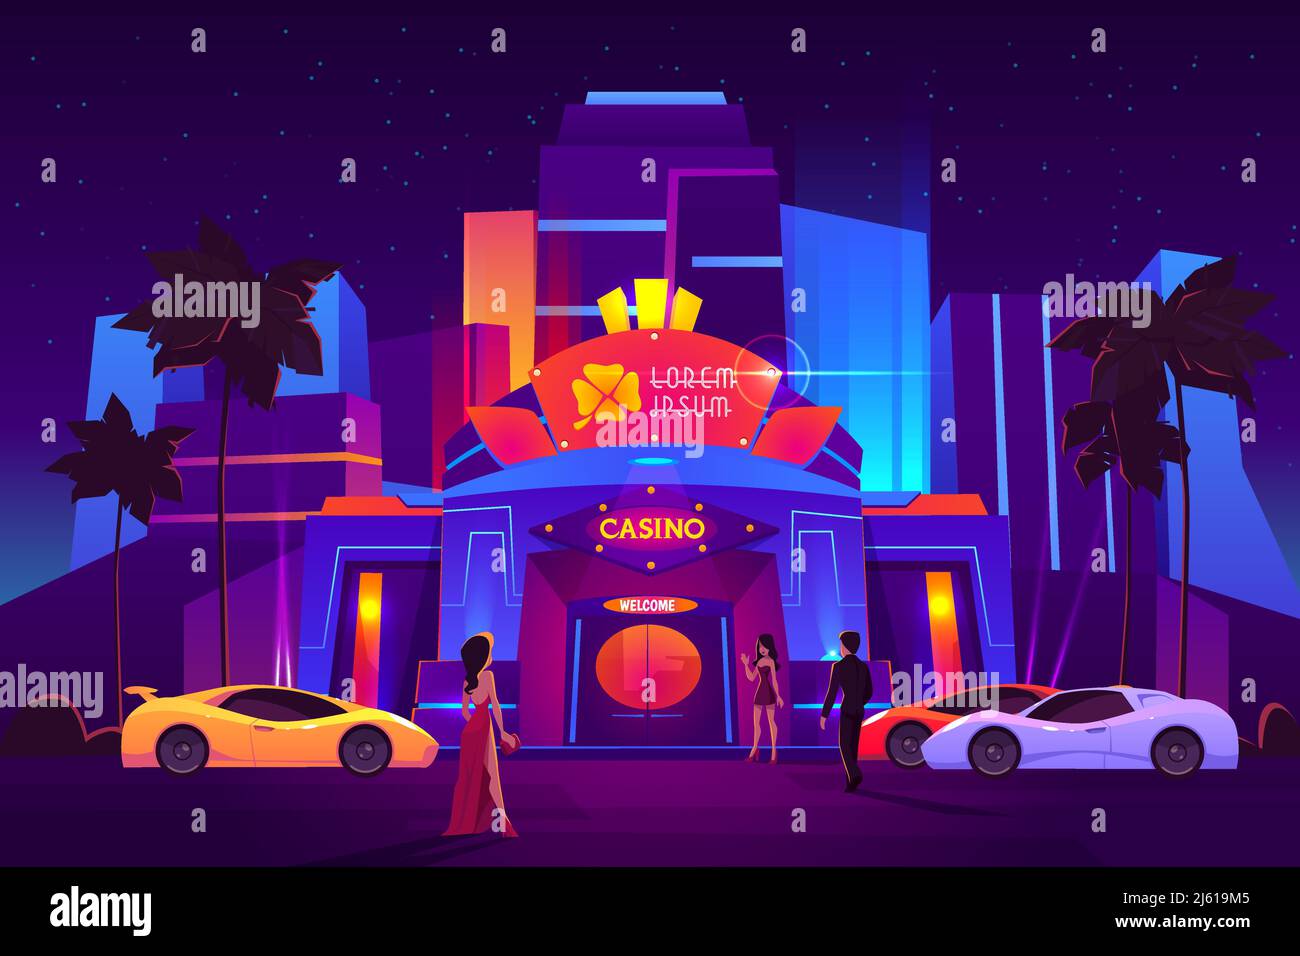 Luxury casino entrance in tropical resort city cartoon vector. Man in business suit, women in evening dresses arriving to brightly illuminated night, Stock Vector